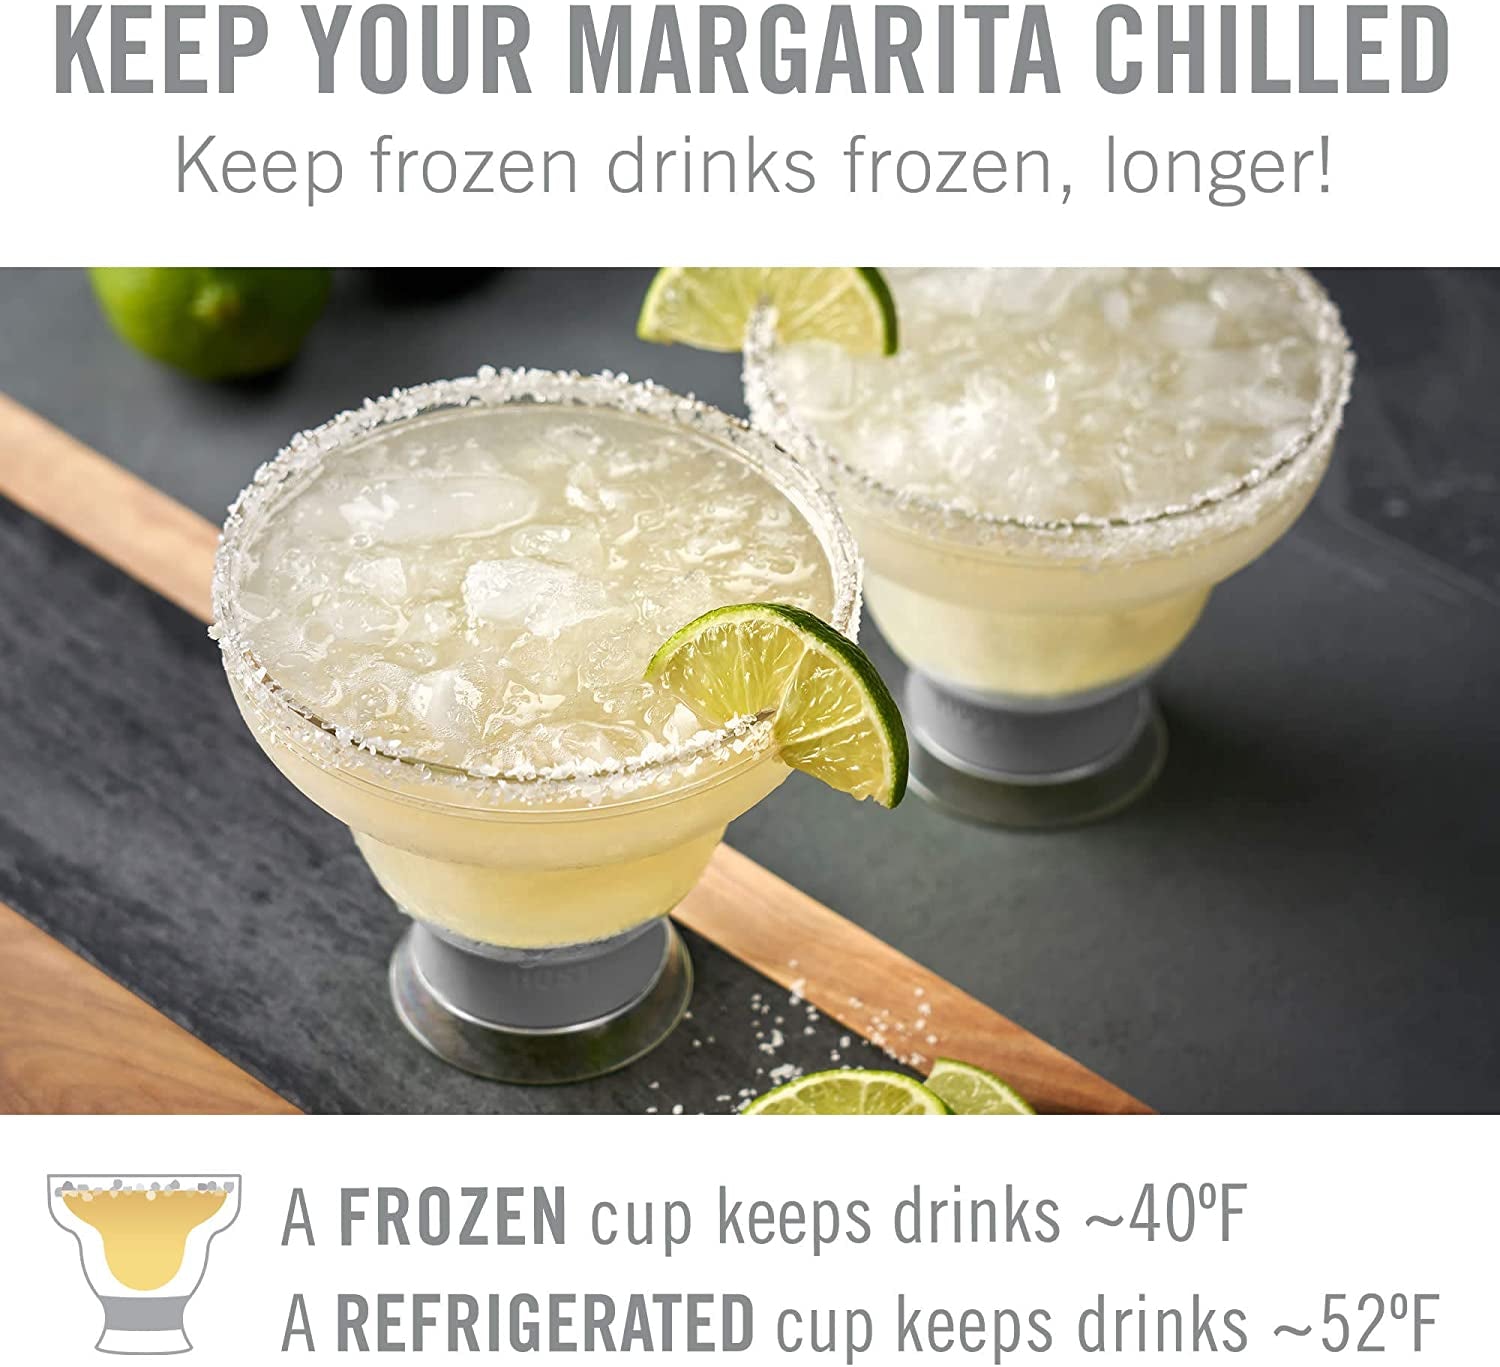 Freeze Stemless Margarita Glasses Double Walled Insulated Gel Chiller Plastic Margarita Glass Cups - Frozen Cocktail Glass Set of 2 12 Oz, Grey